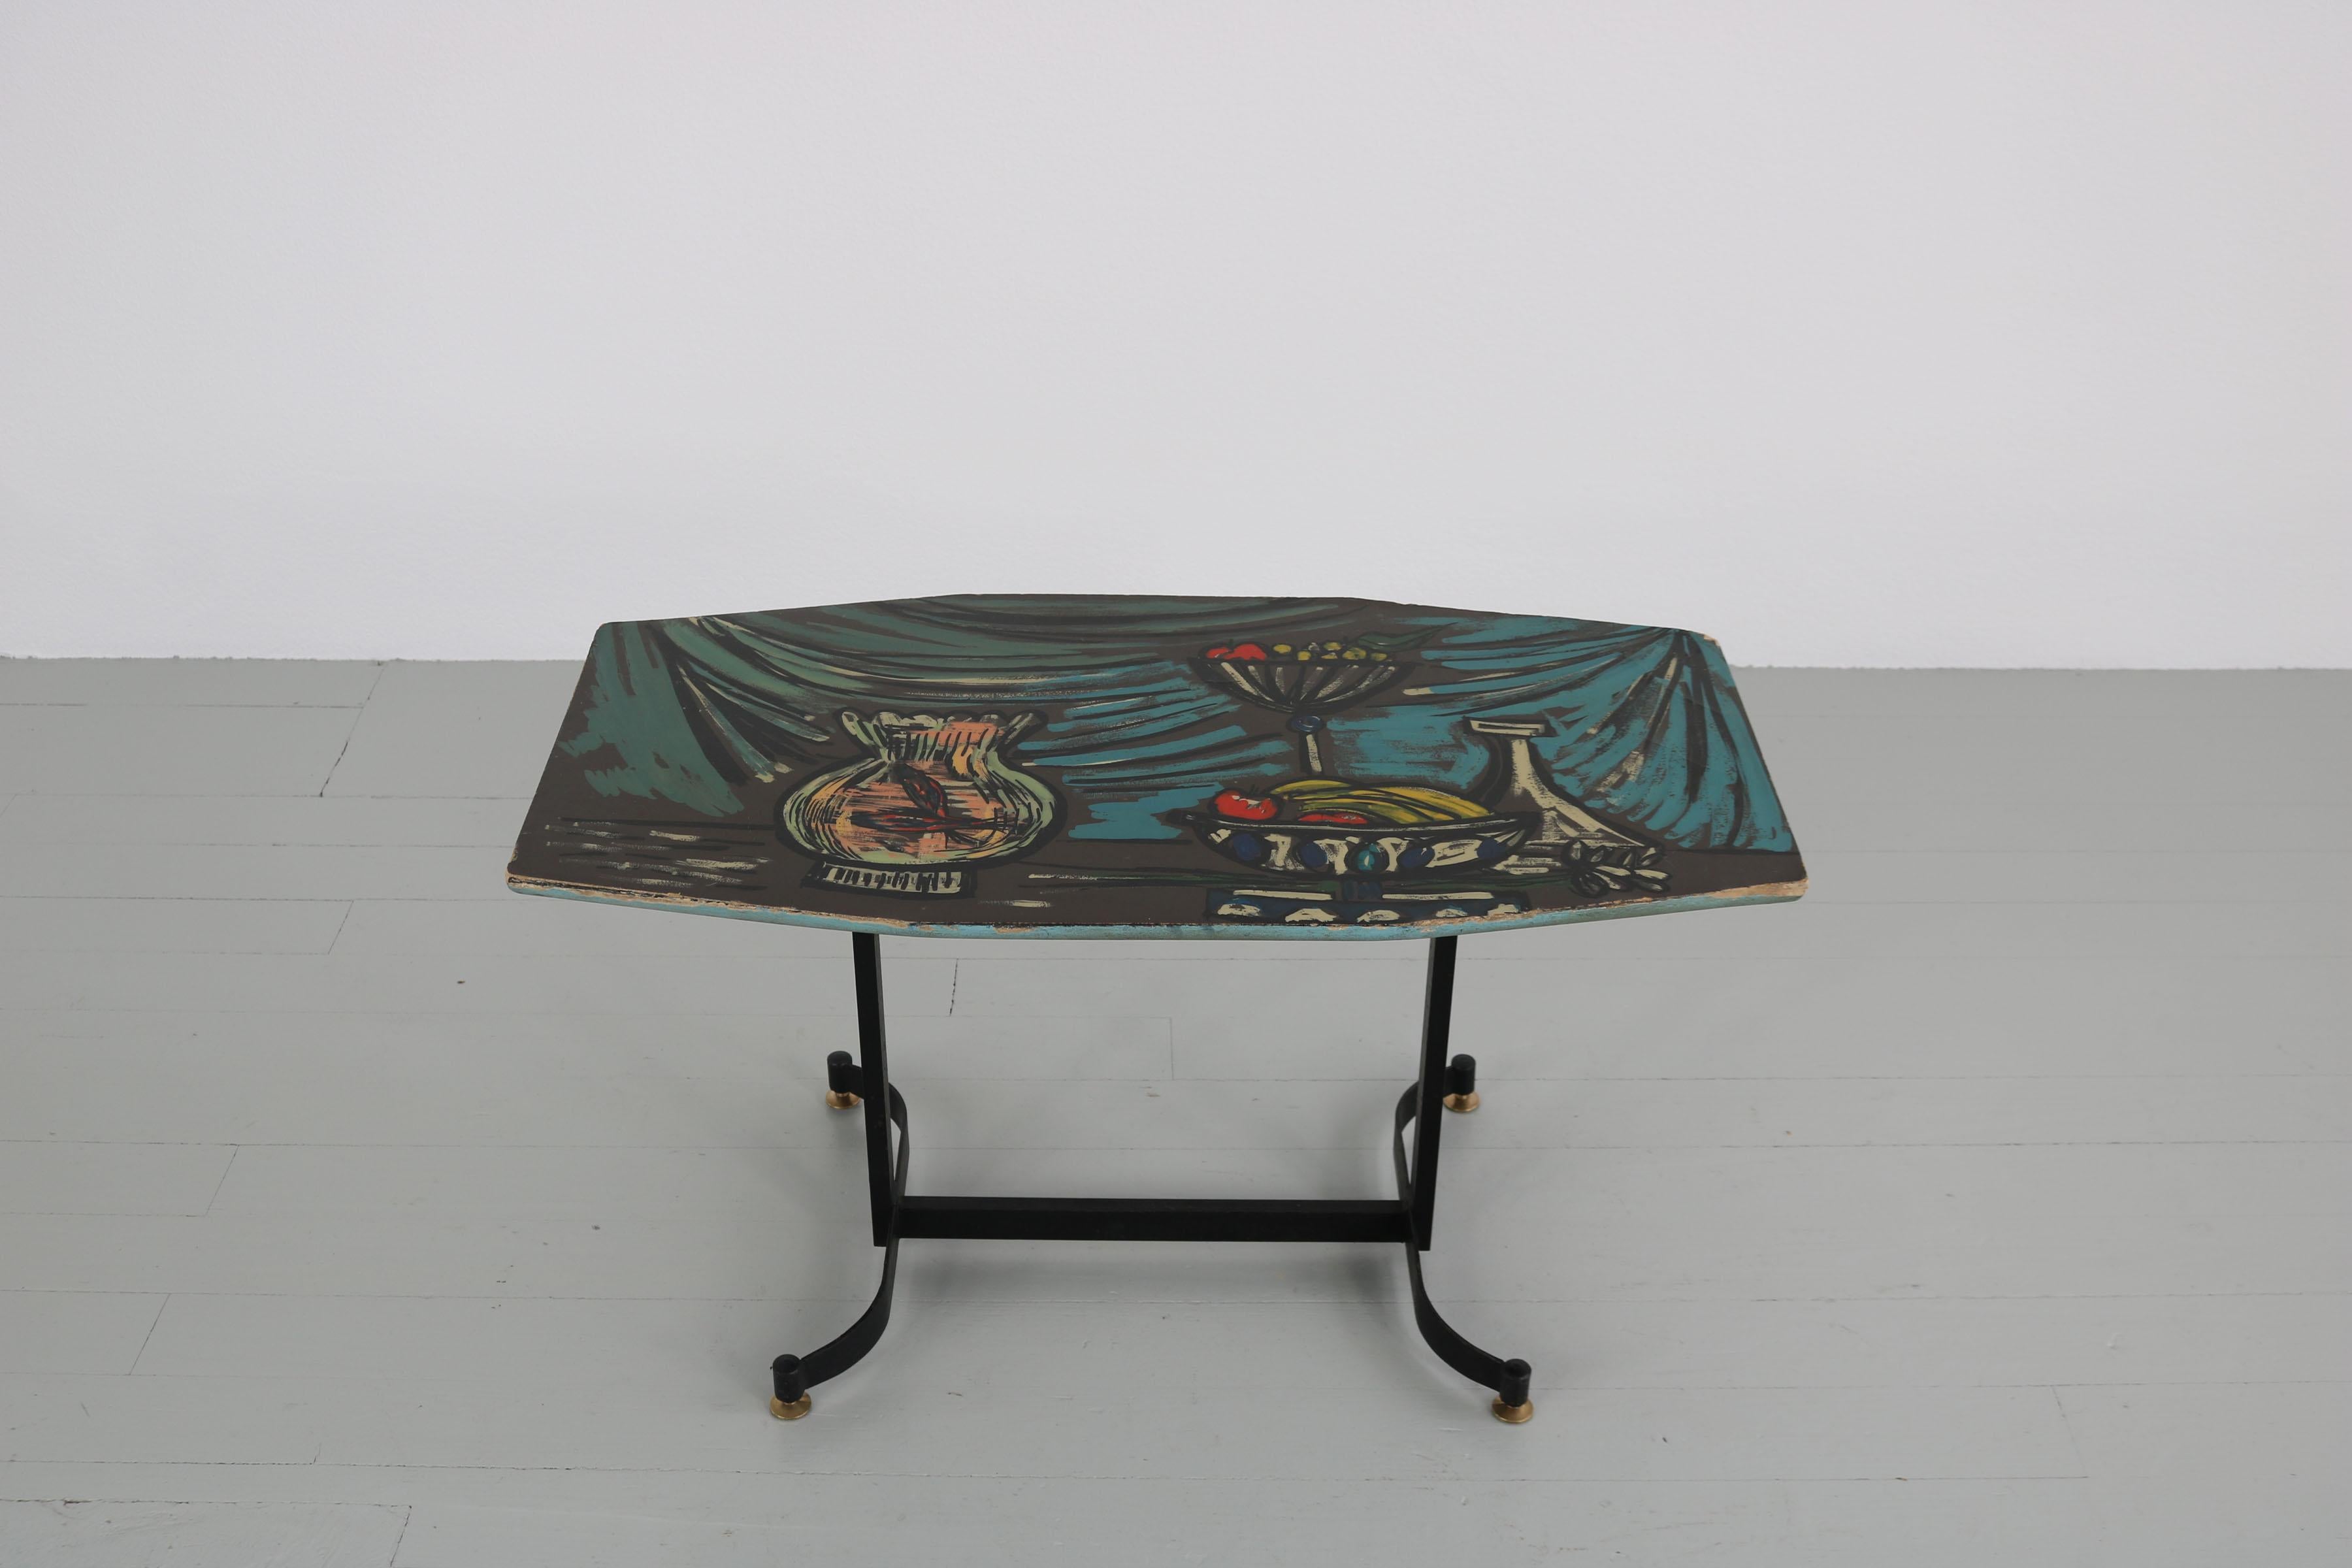 Italian Dark Sofa Table with Colorful Hand Painted Motives on Table Top, 1950s For Sale 10